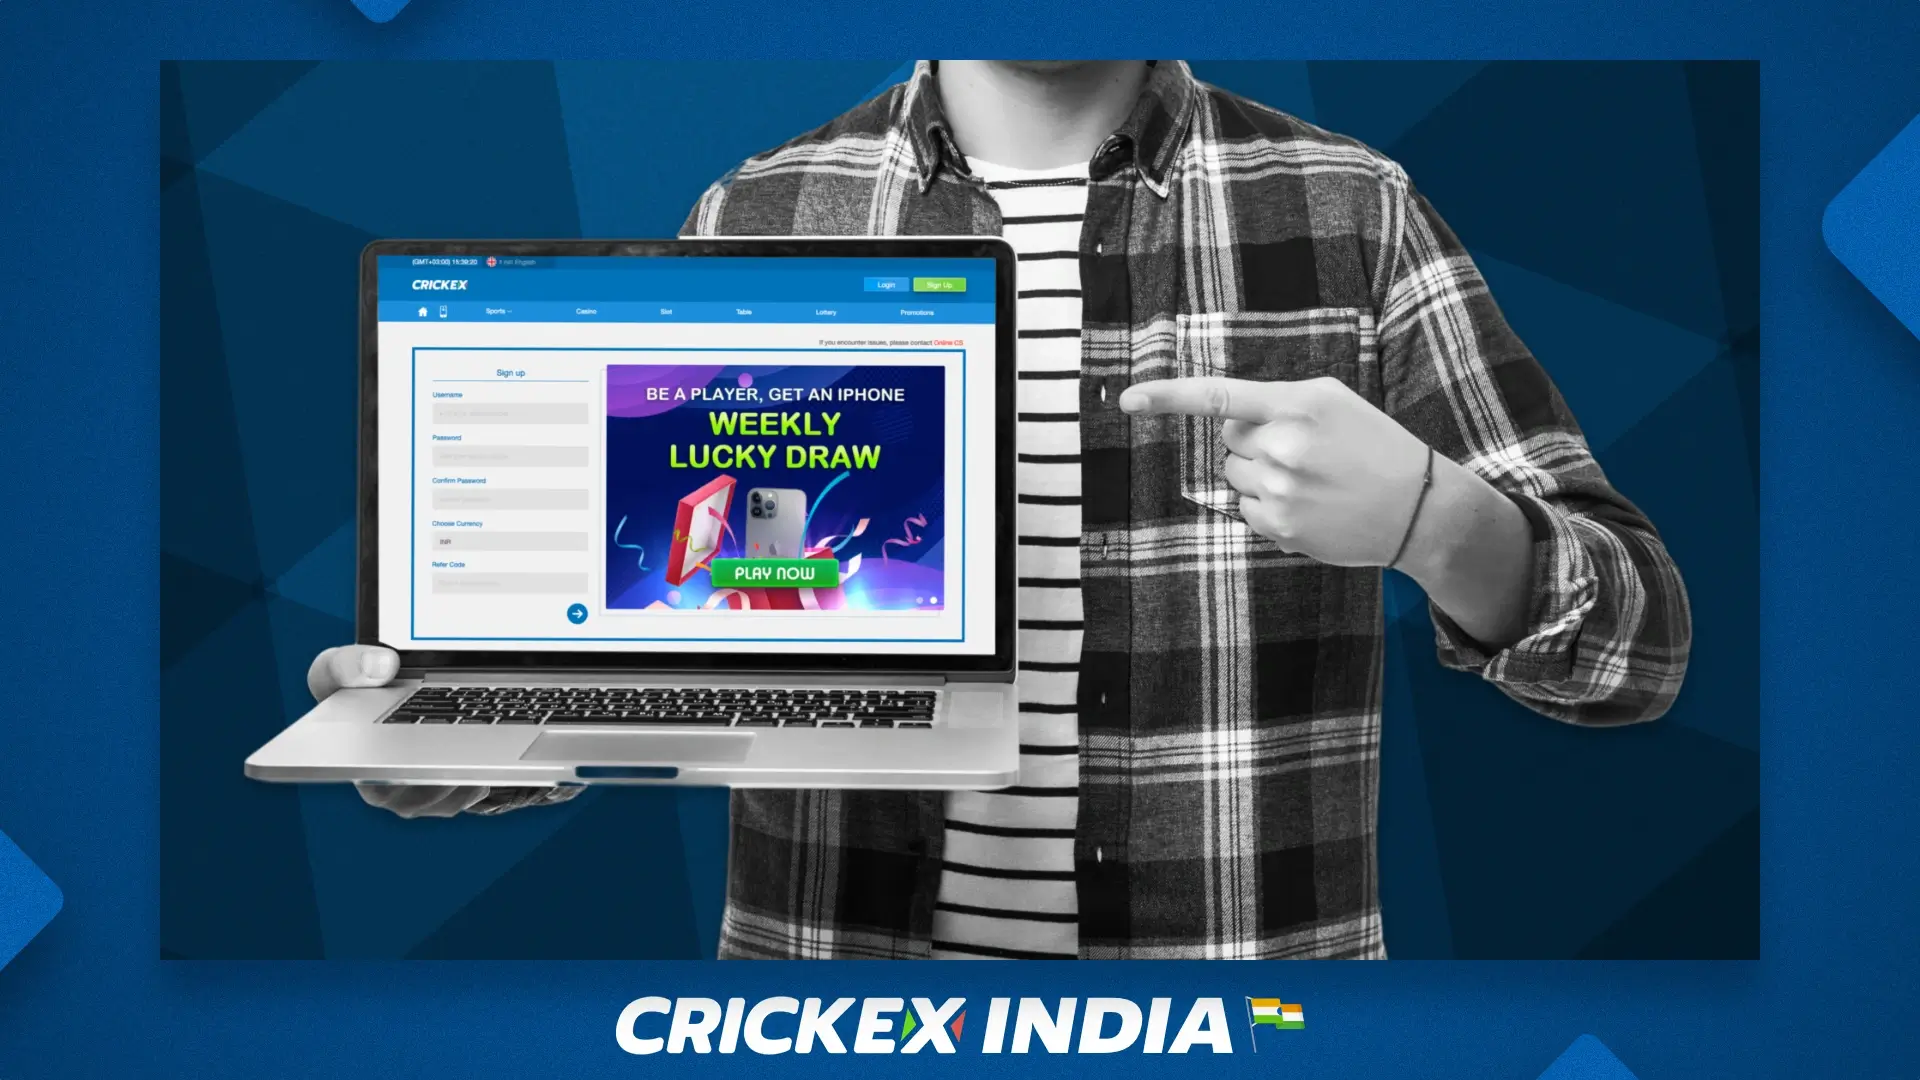 The main requirements for new players when registering at Crickex India